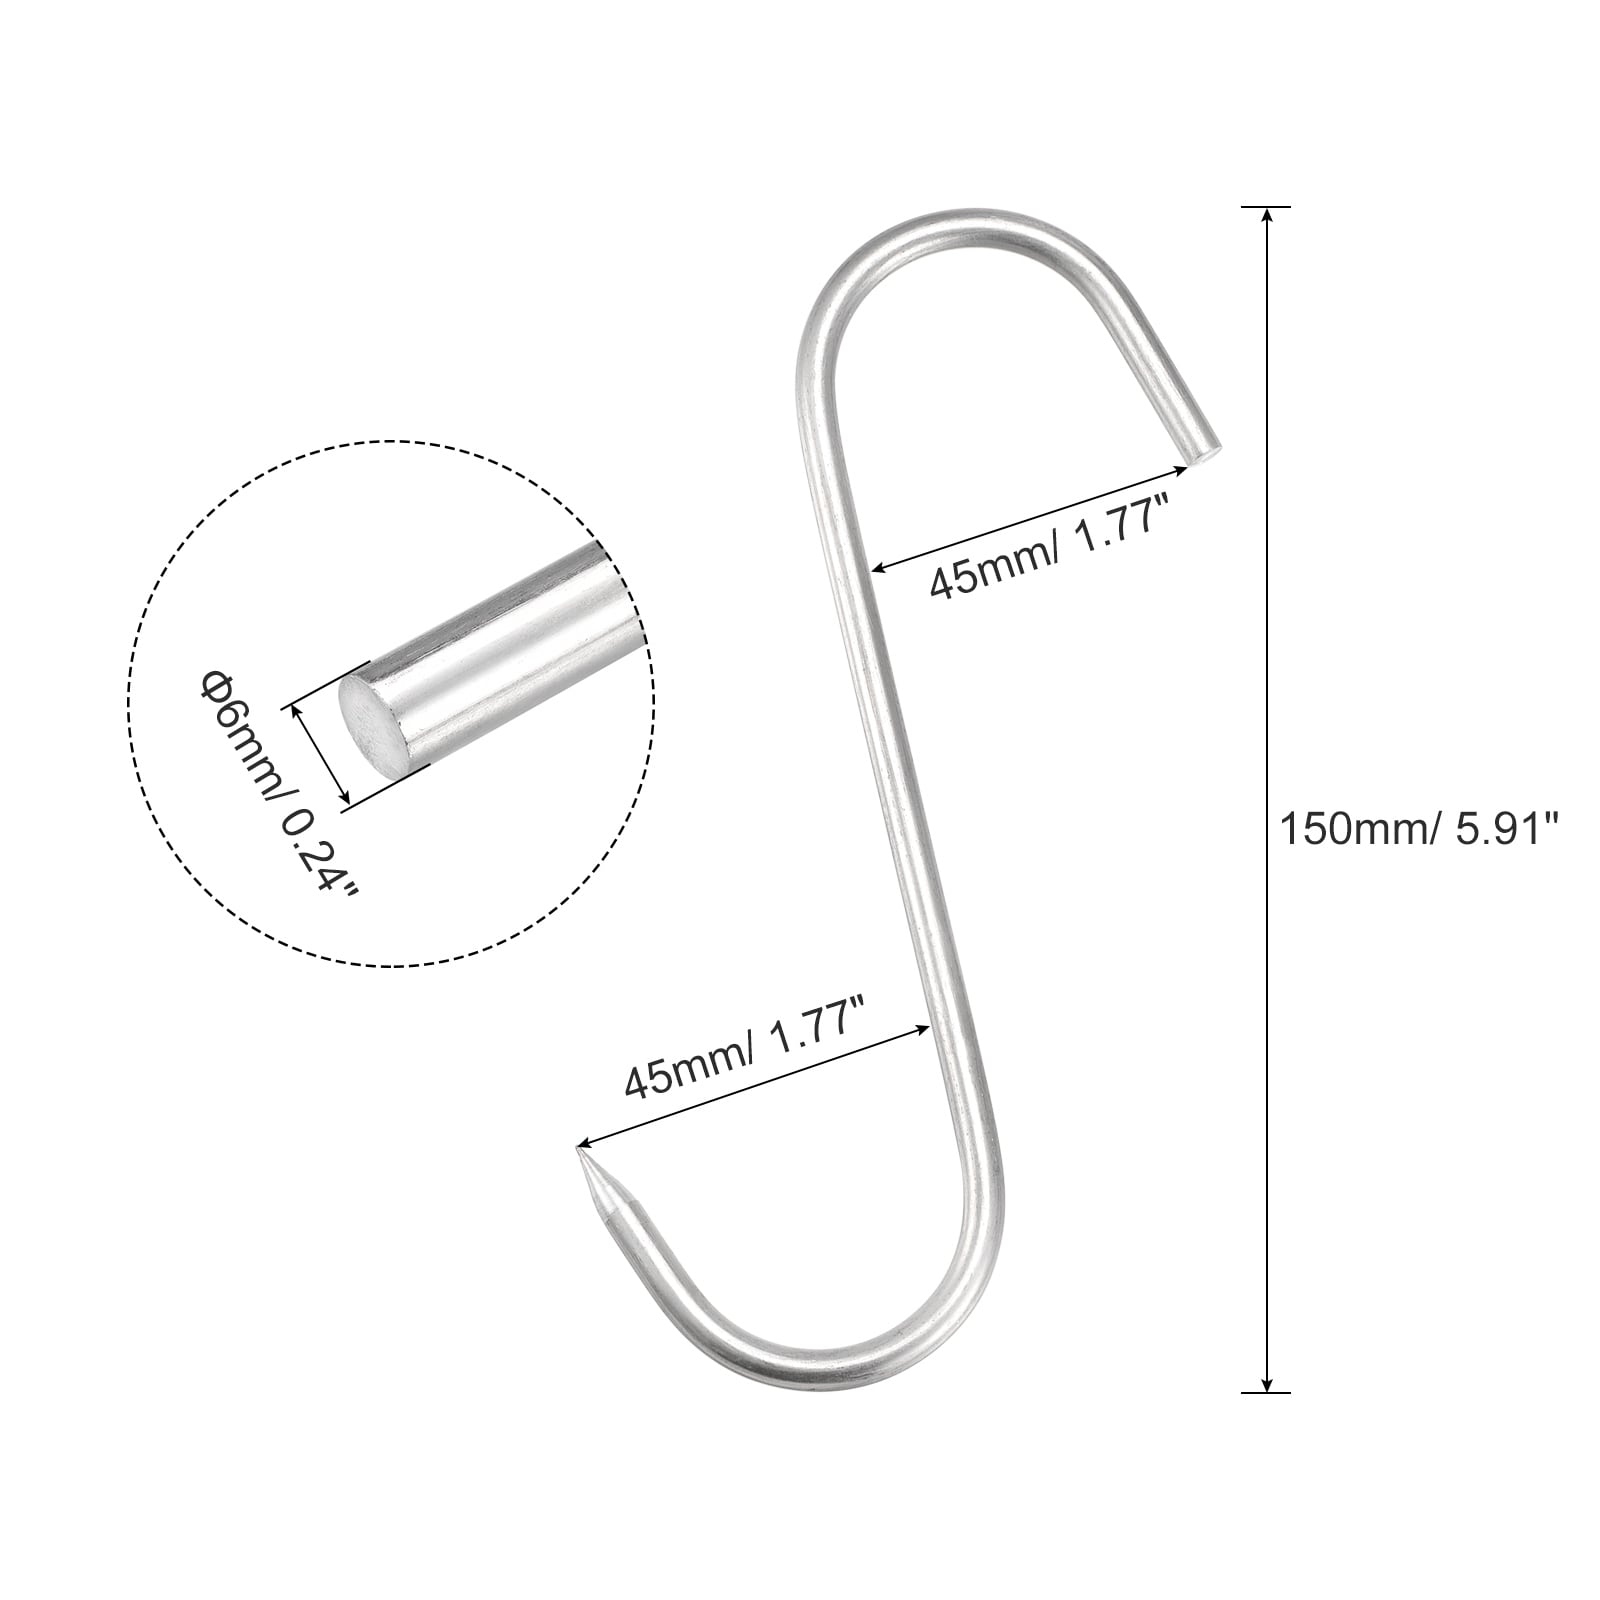 5.91 Meat Hooks, 0.24 Thick Stainless Steel S-Hook Meat